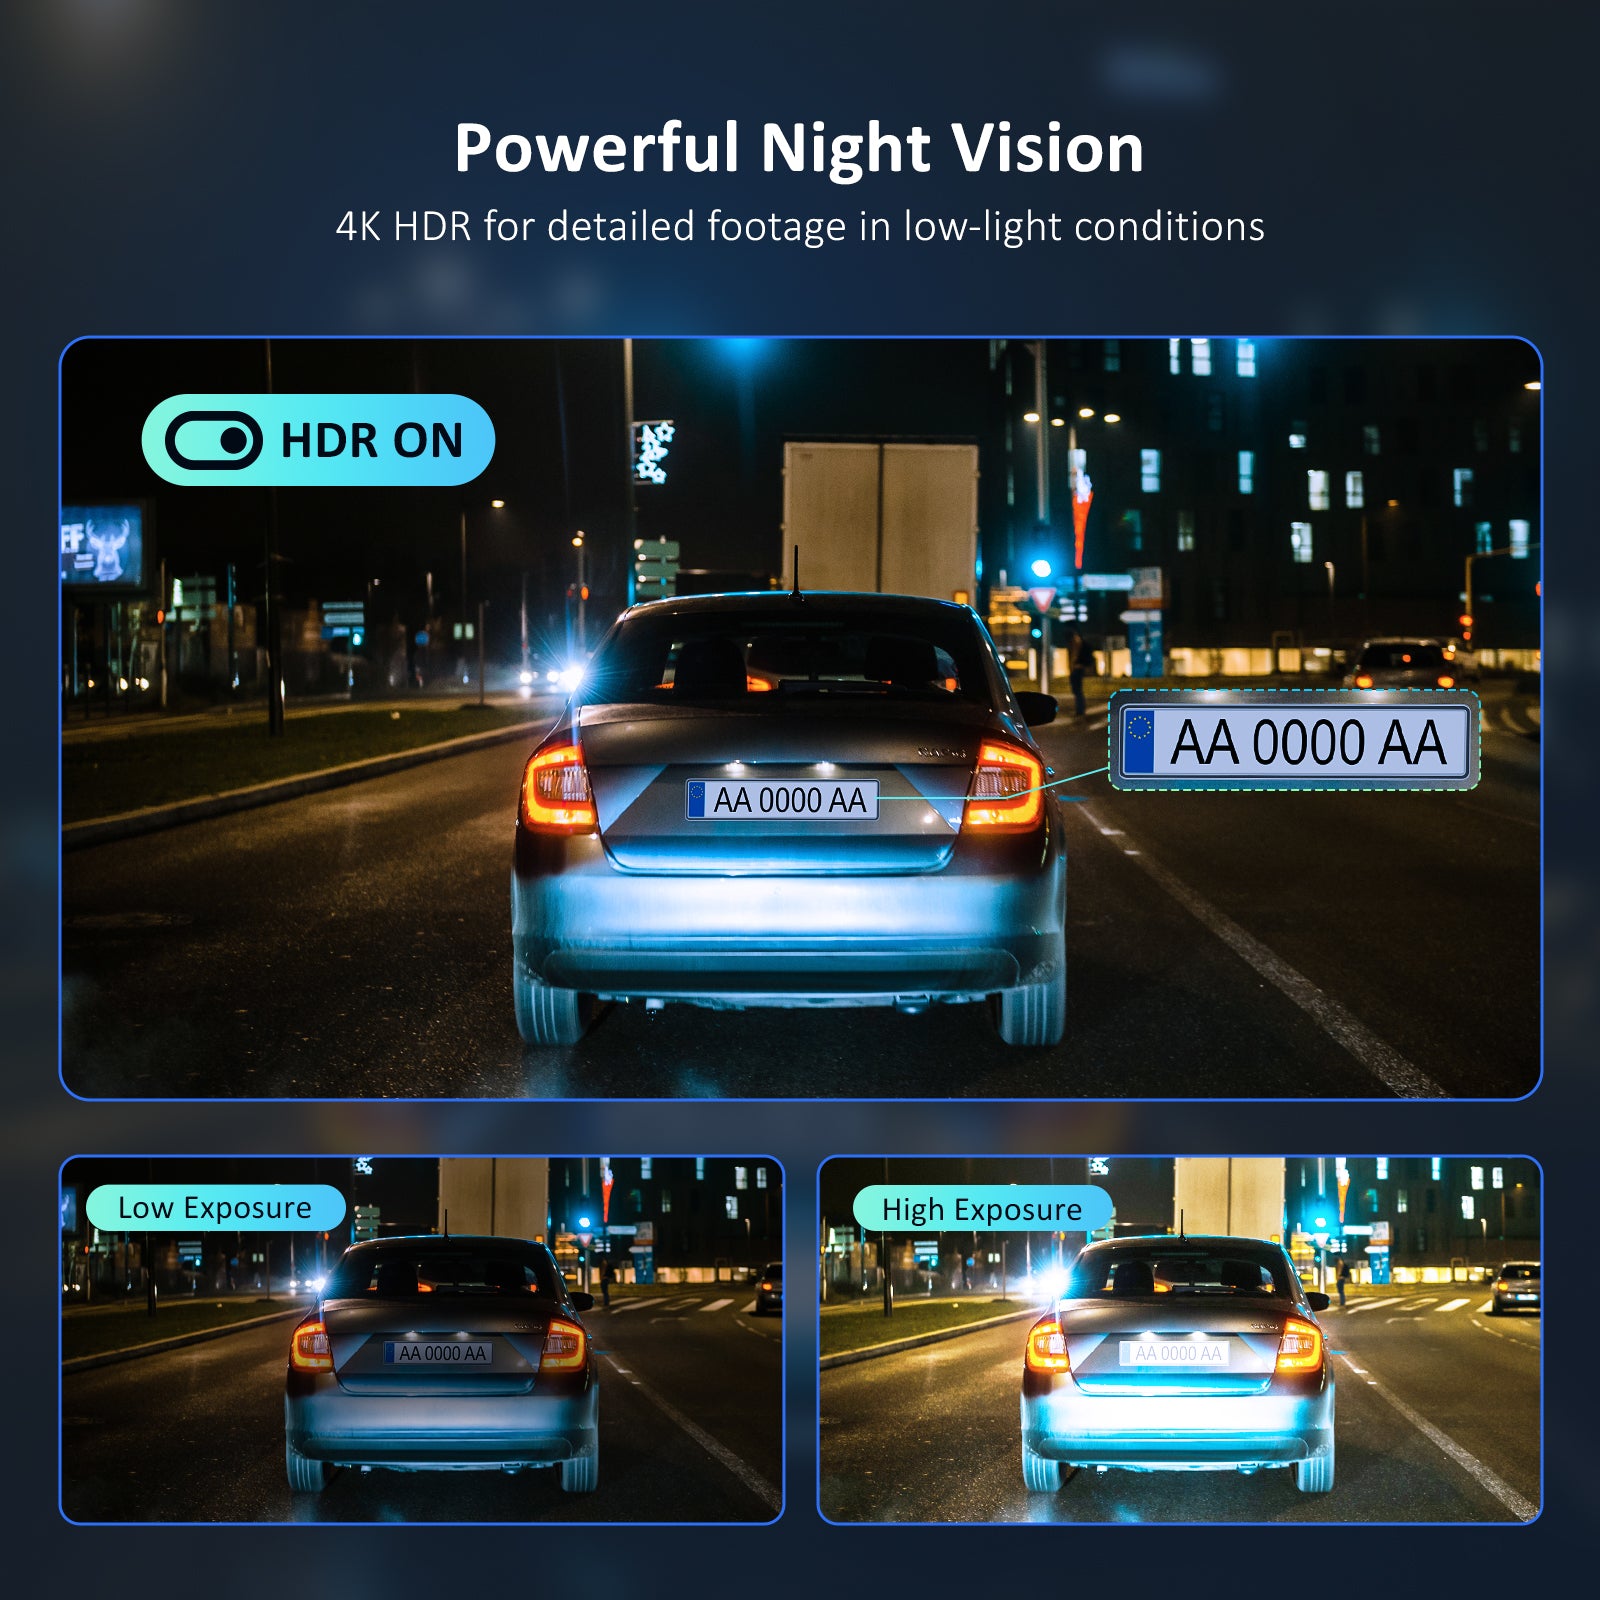 the dashcam with powerful night vision